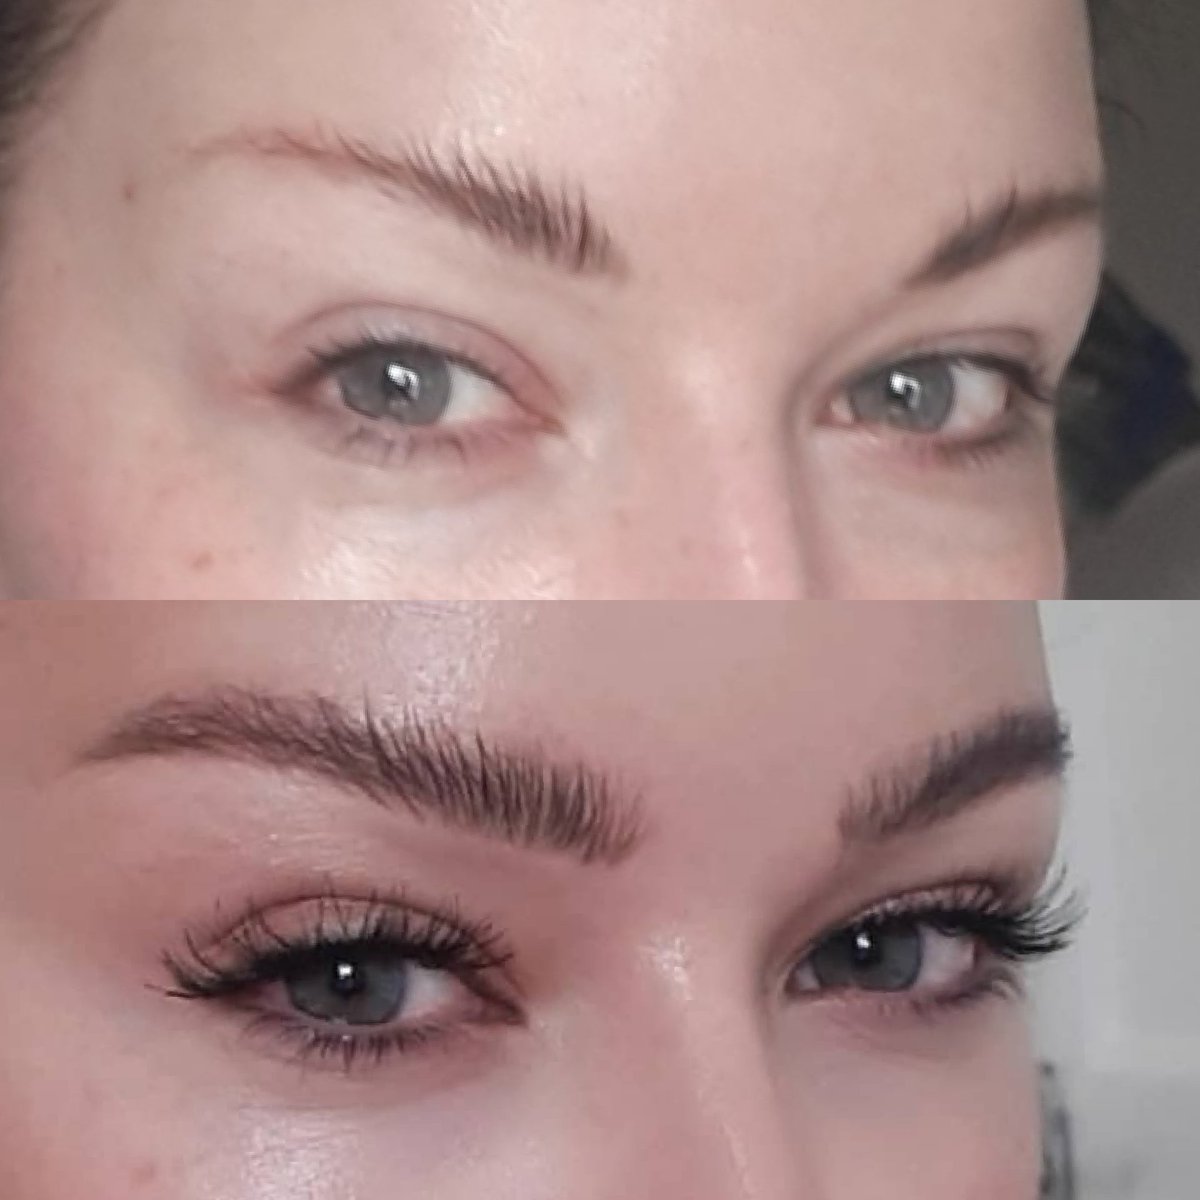 Stina cawley on Twitter: "Before and after brows using @ABHcosmetics brow pomade in medium and dark brown to create fluffy textured brows Lashes as always by @SoSueMe_ie #wakeupandmakeup #sosuelashes #ABHBrows #anastasisbeverlyhills #beforeandafter #